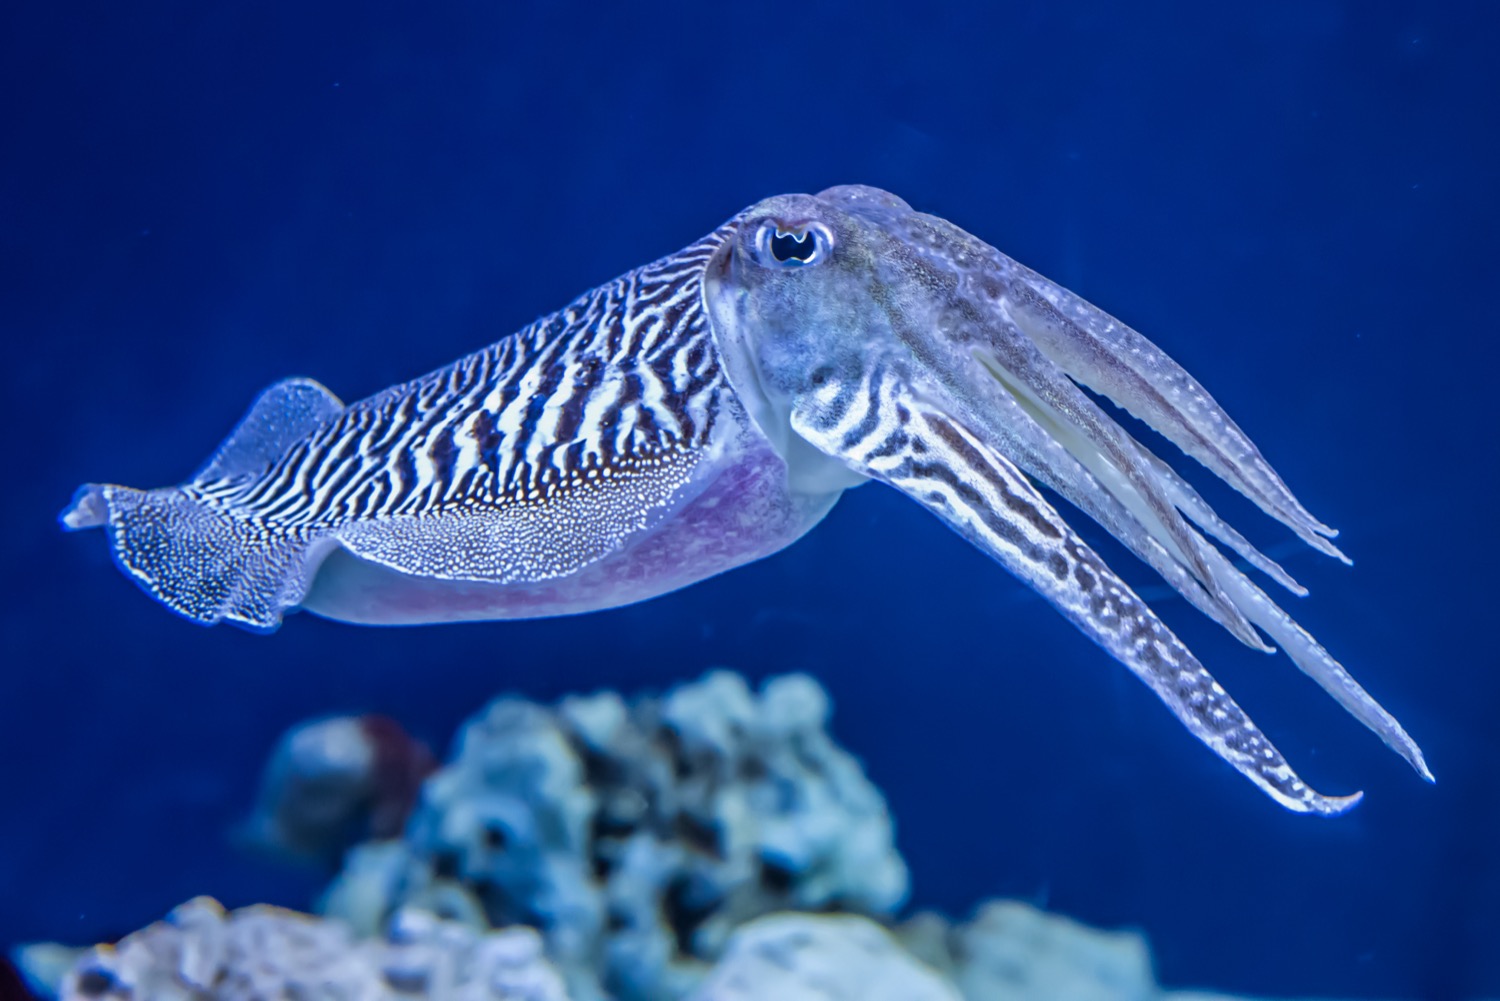 a vaguely football-shaped squid with zebra-like black and white markings. from its mouth section are eight tentacles almost the length of its body